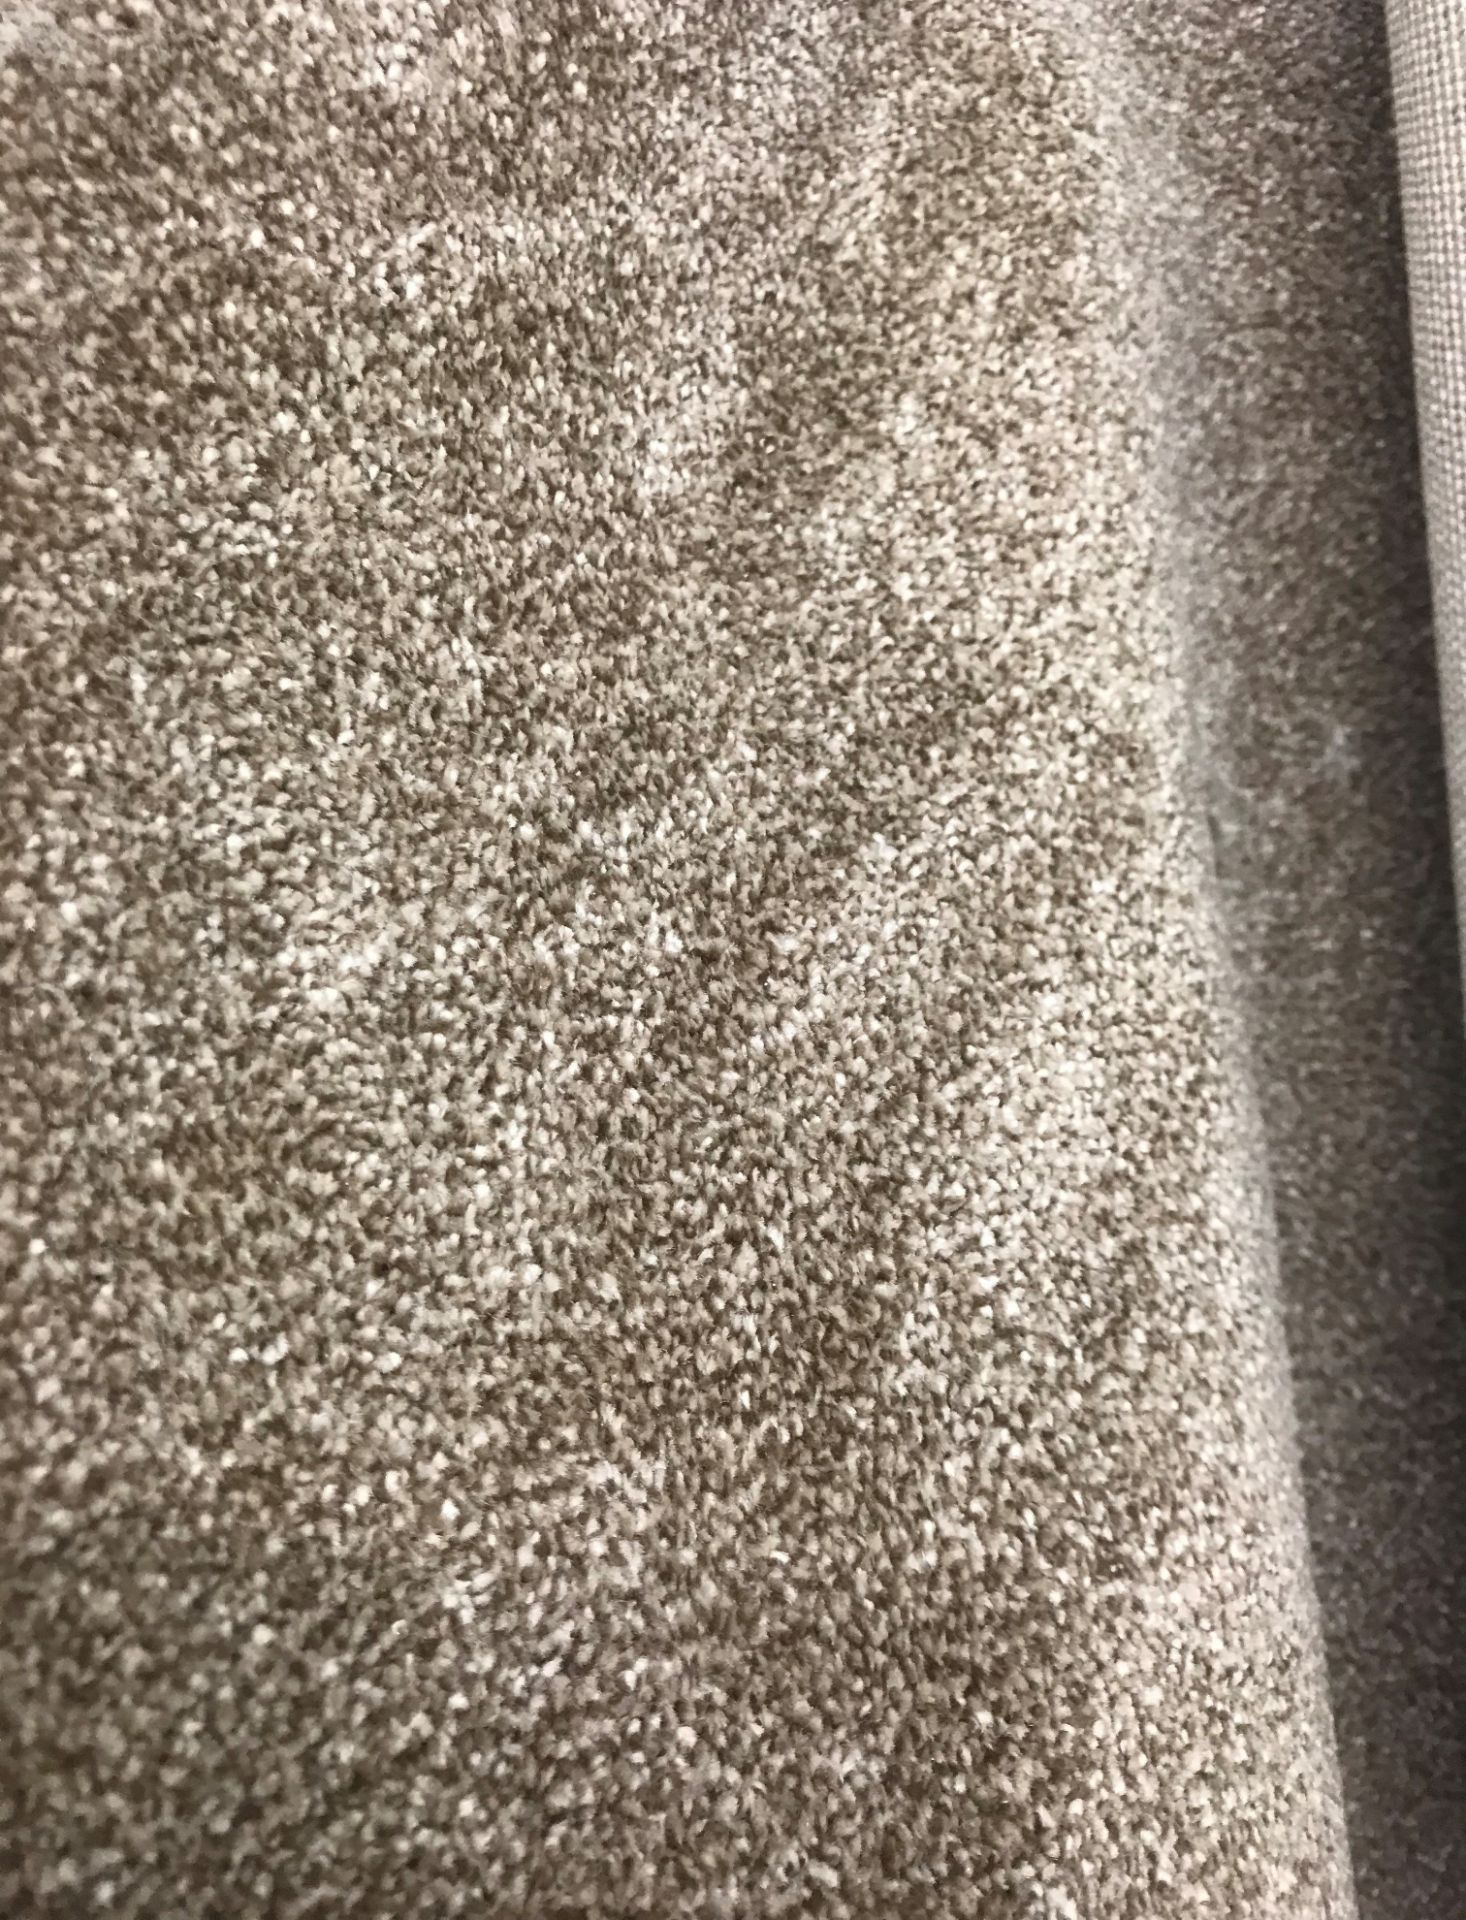 1 x Luxury Quality 50Oz Twist Pile Carpet - Colour Malted Barley - - 16.5X4 Meter Roll - Rrp £36. - Image 2 of 3